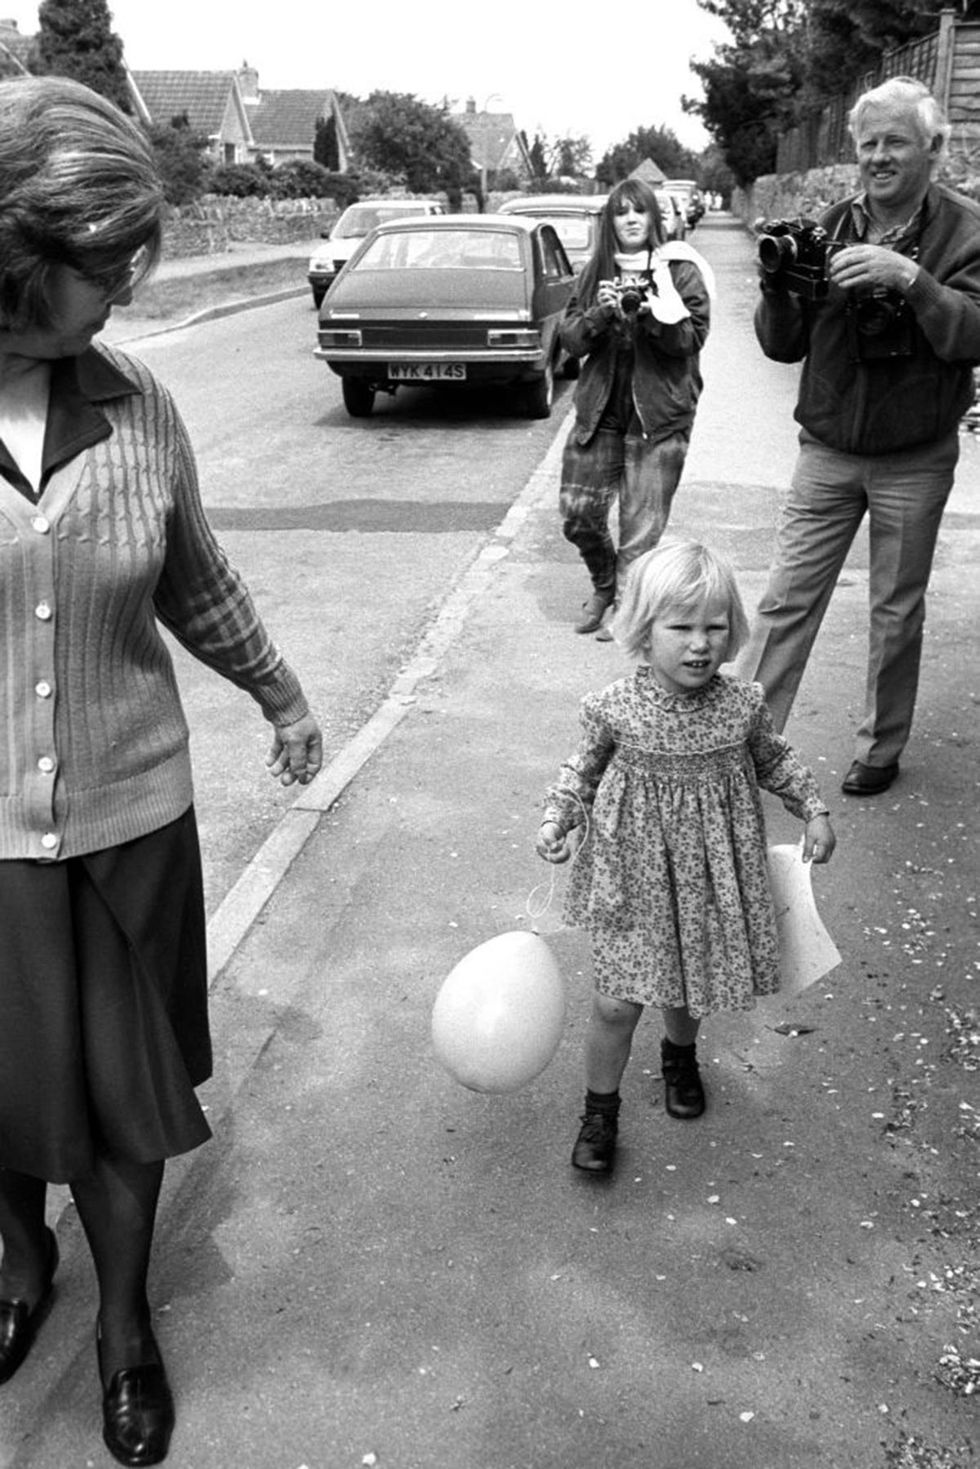 Photograph, People, Child, Black-and-white, Monochrome, Snapshot, Standing, Monochrome photography, Photography, Ball, 